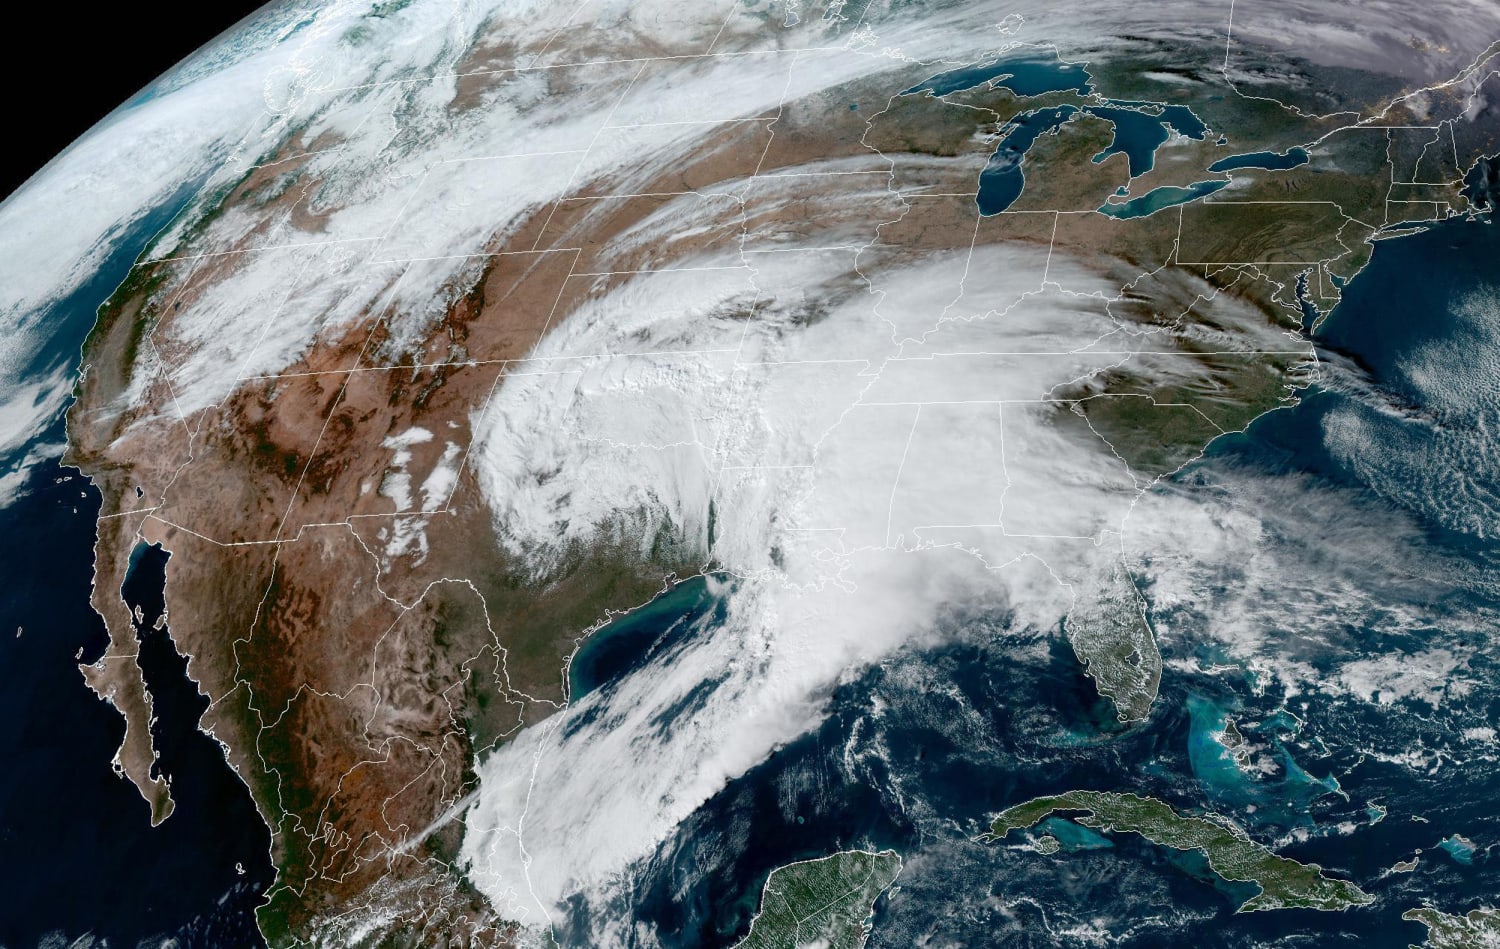 Post-Thanksgiving travel could be hampered by severe weather across country